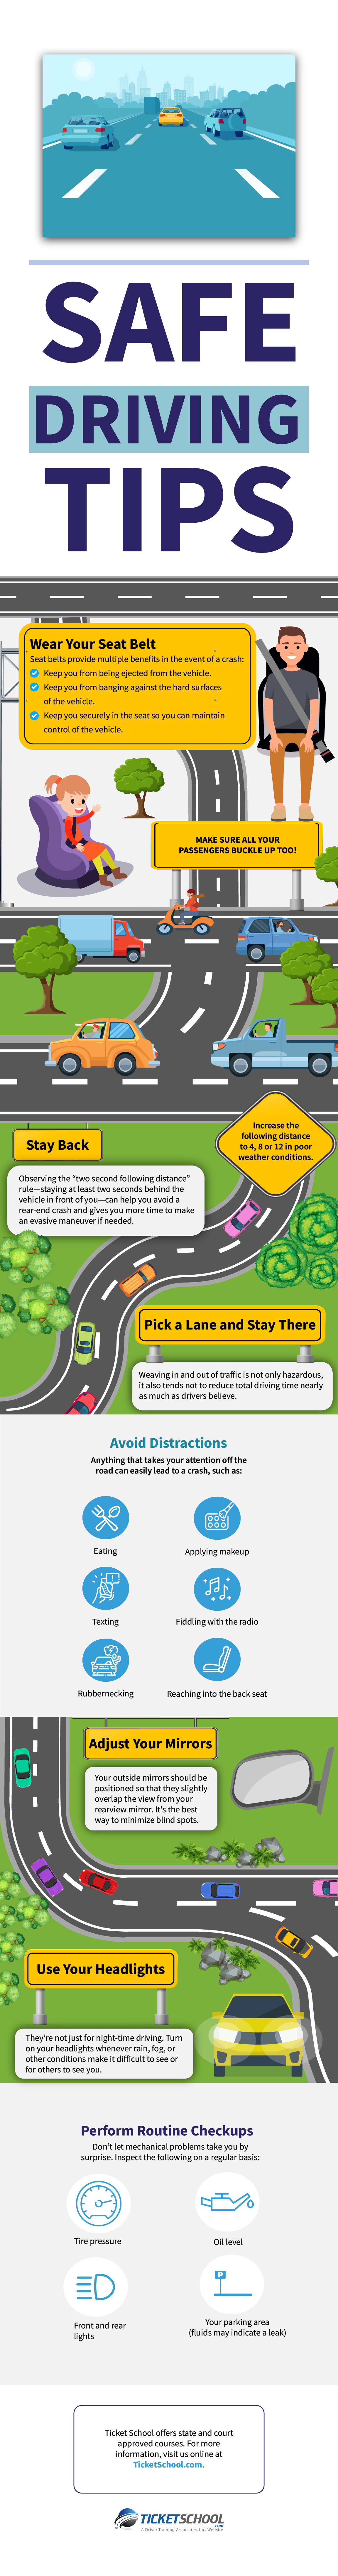 Safe Driving Tips Infographic